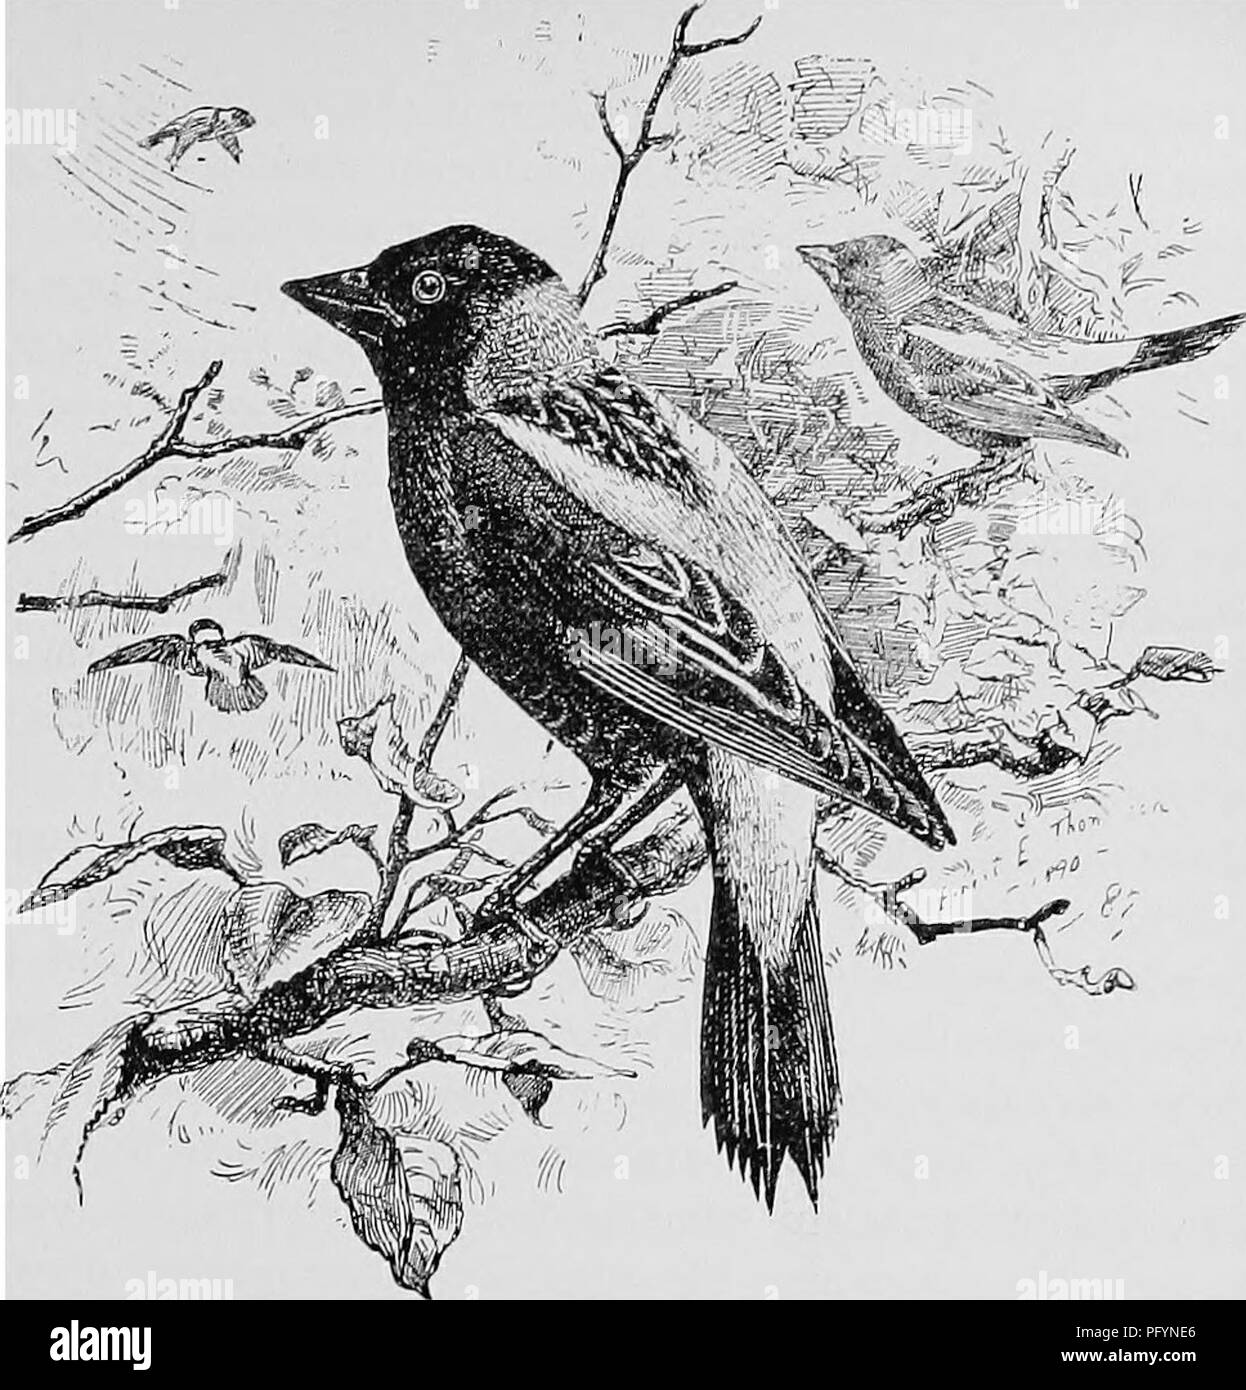 . A popular handbook of the ornithology of the United States and Canada, based on Nuttall's Manual. Birds; Birds. BOBOLINK. RICE BIRD. SKUNK BLACKBIRD. MEADOW-WINK. DOLICHONYX ORYZIVORUS. •Char. Male in summer ^ black; back of head and hind-neck buff j scapulars, rump, and upper tail-coverts ashy white. Male in winter, female, and young : above, yellowish brown, beneath paler, more buffy; light stripe on crown. Length 6J1^ to 7^ inches. Nest. In a meadow ; made of dried grass. Eggs. 4-6; white with green or buff tint, irregularly marked with lilac and brown; 0.85 X 0.60. The whole continent of Stock Photo